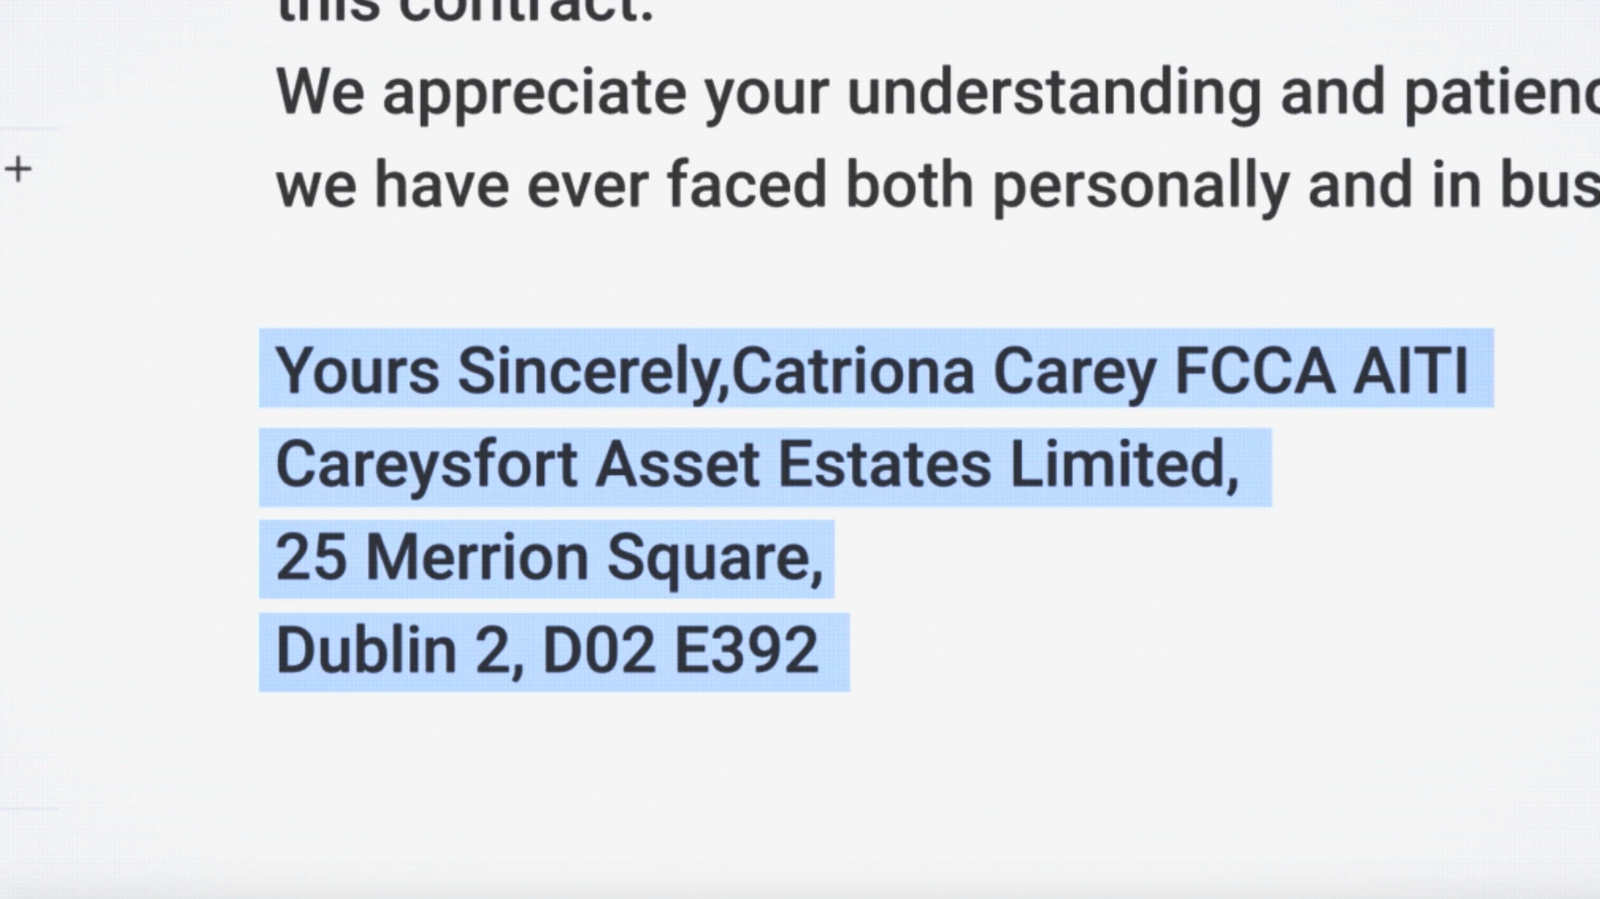 Image - Catriona Carey signed emails using acronyms that suggested she was a member of respected organisations